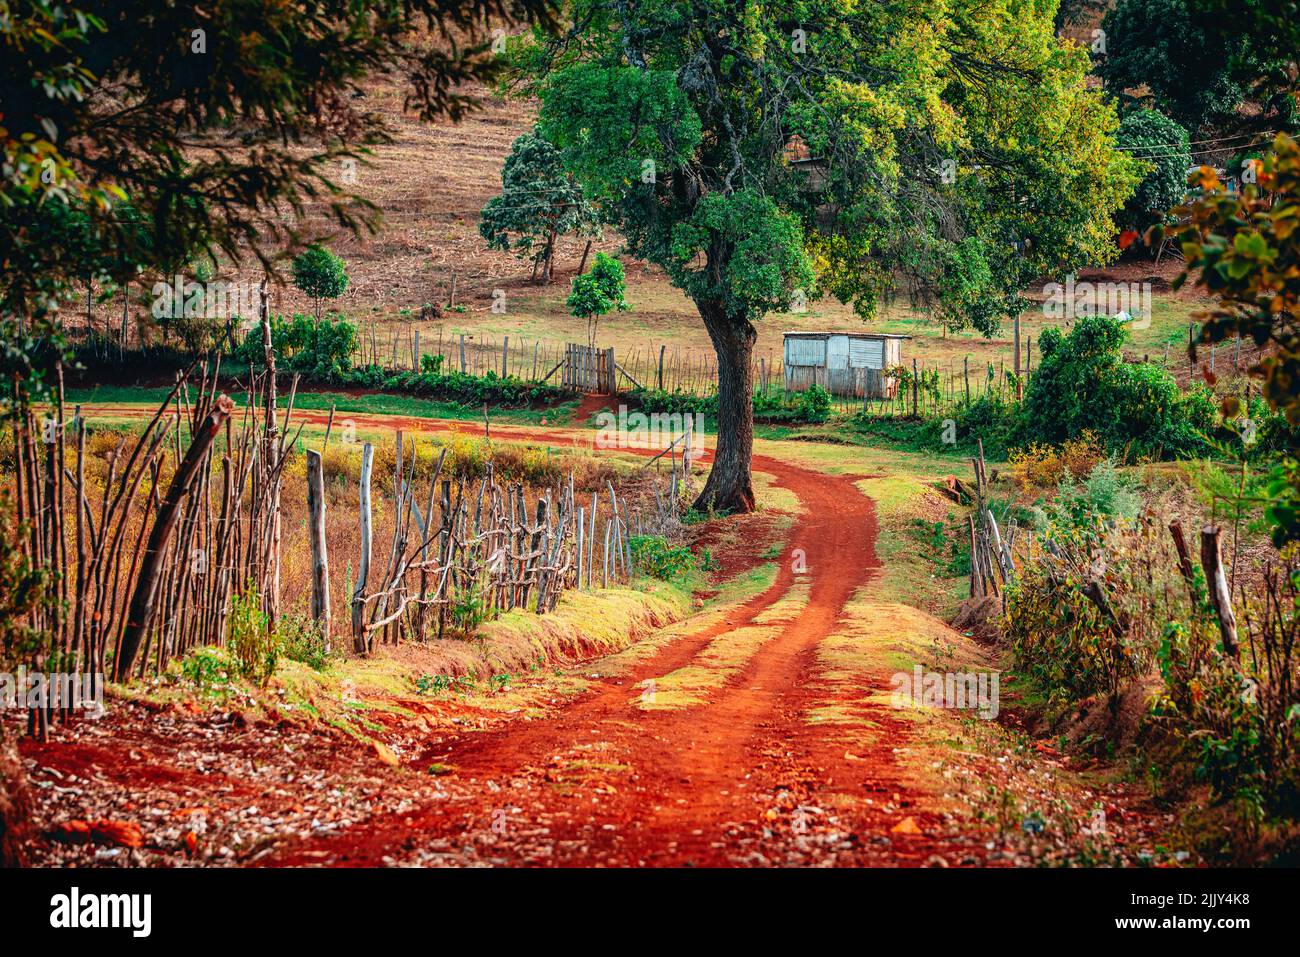 Beautiful African landscape. A tree and roads with red soil surrounded by a wooden fence. Rural life in Kenya, East Africa Stock Photo